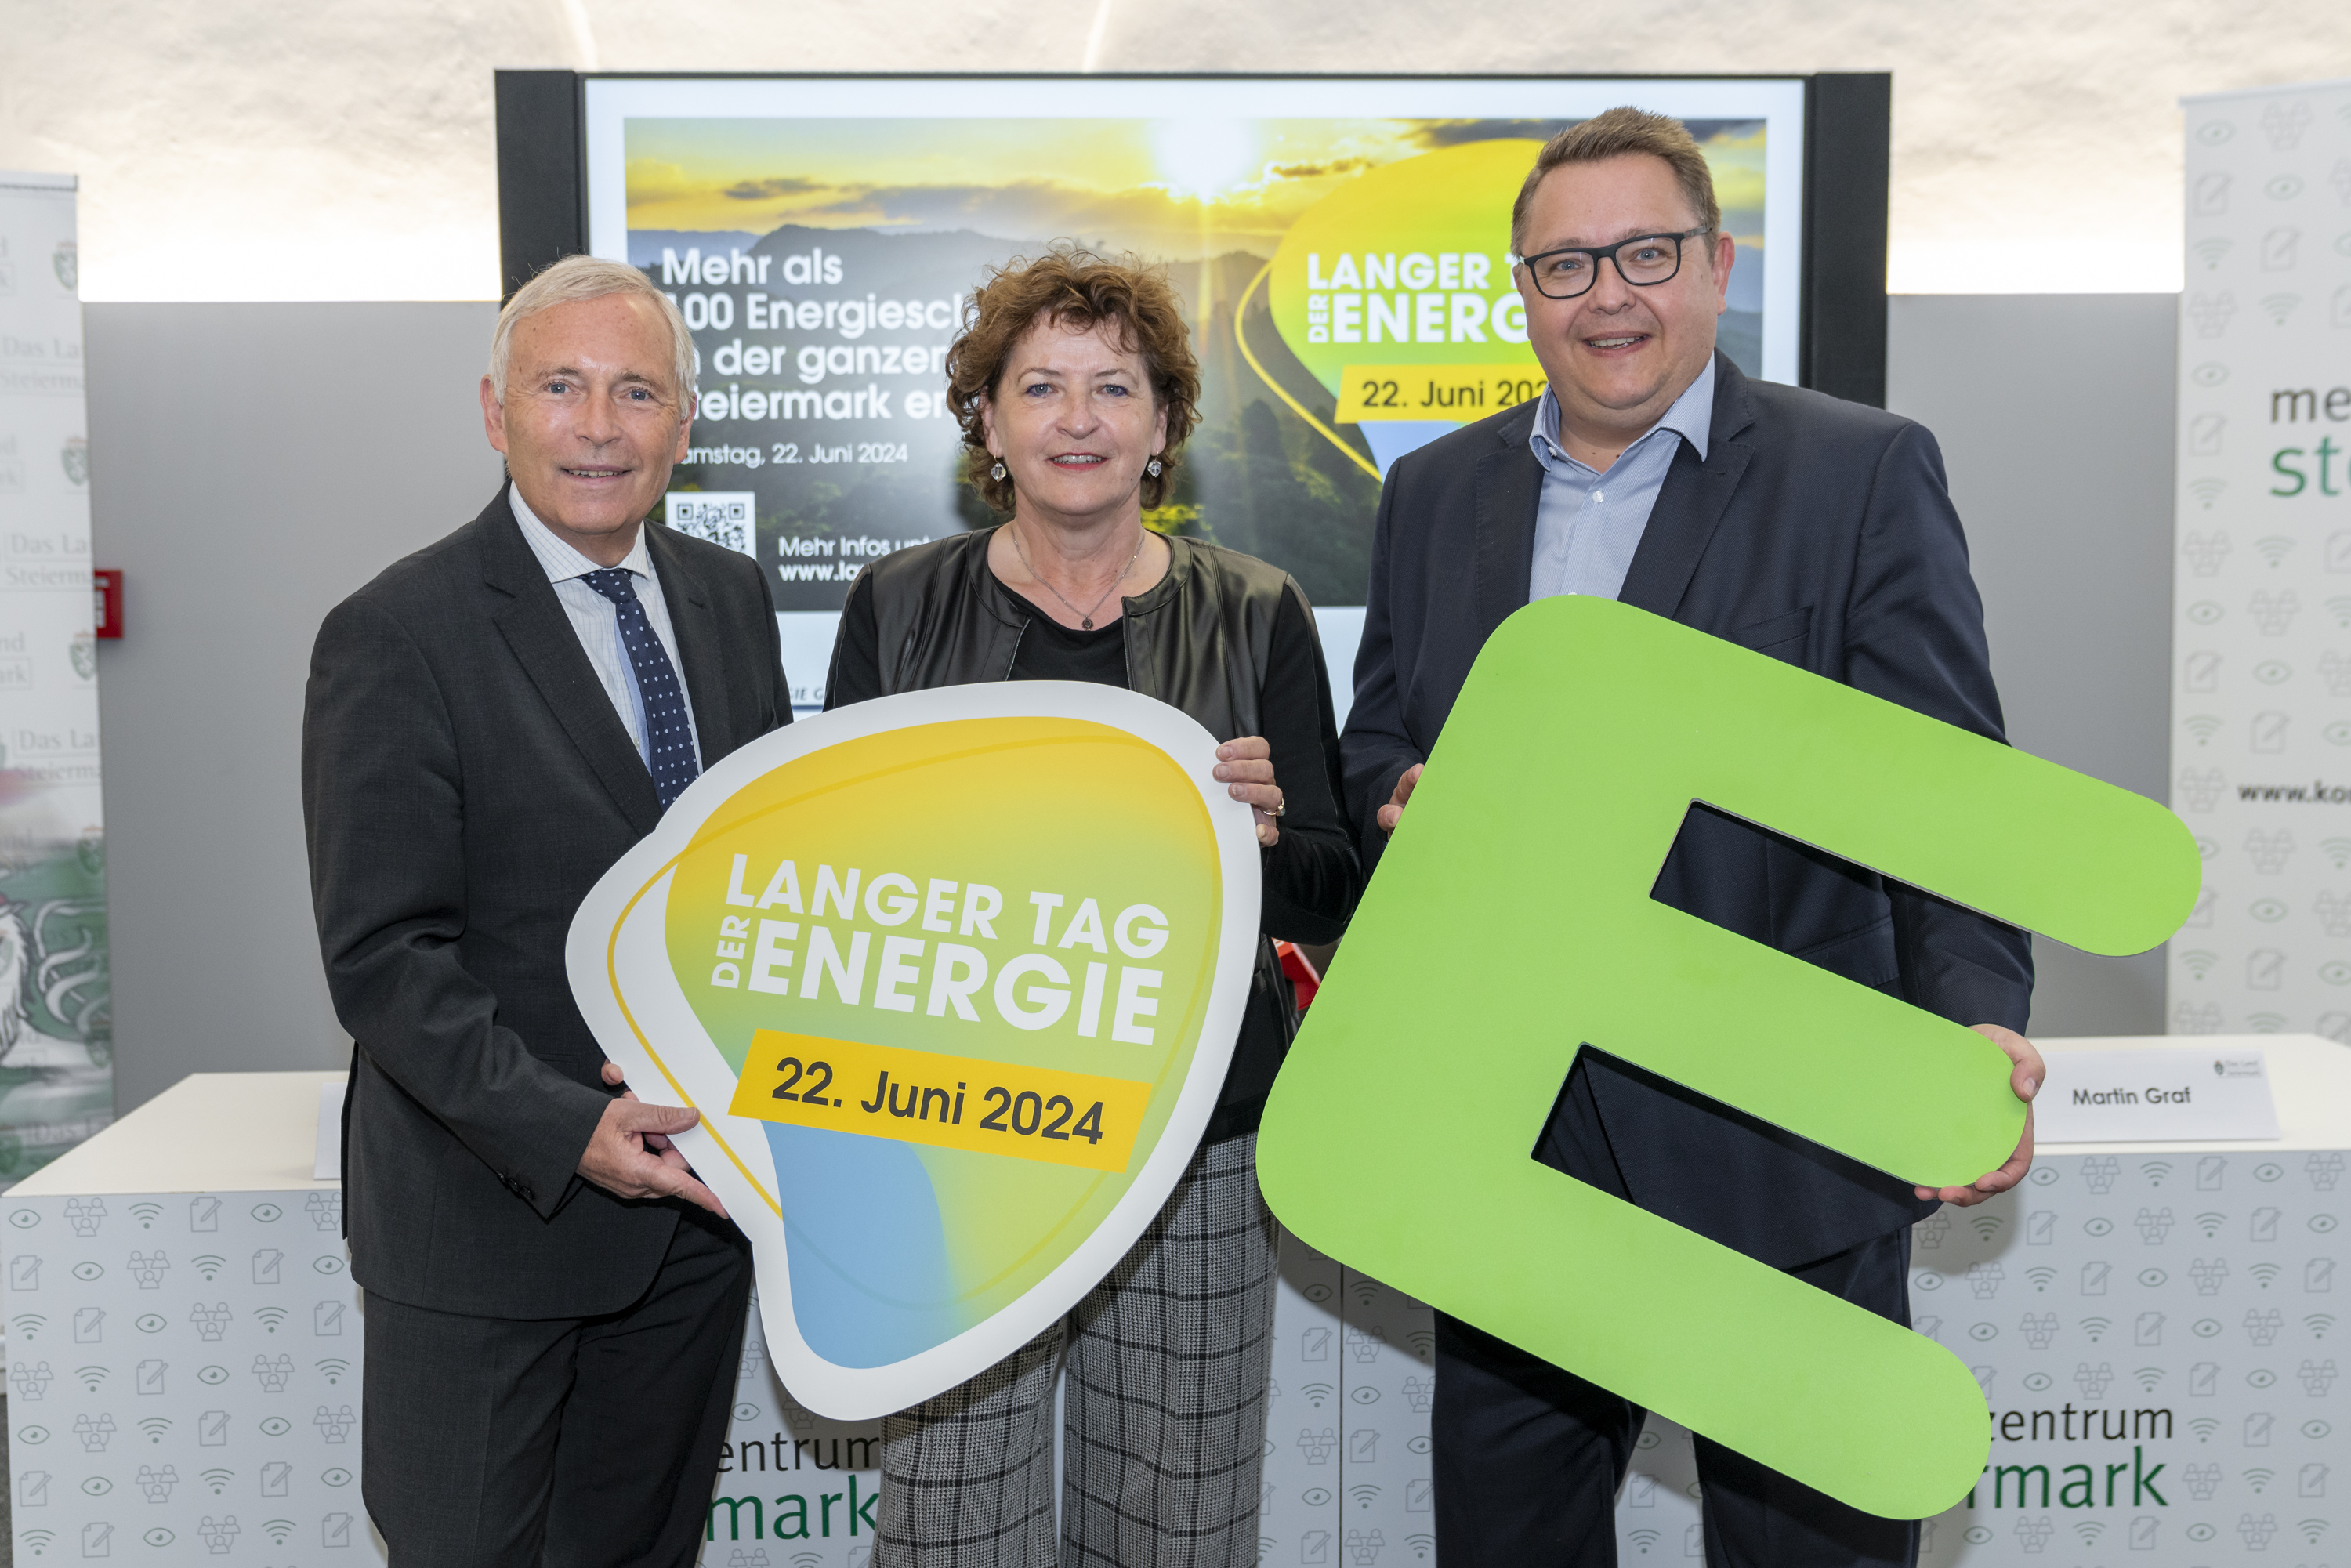 More than 100 energy venues open their doors on the “Long Energy Day” – Styria